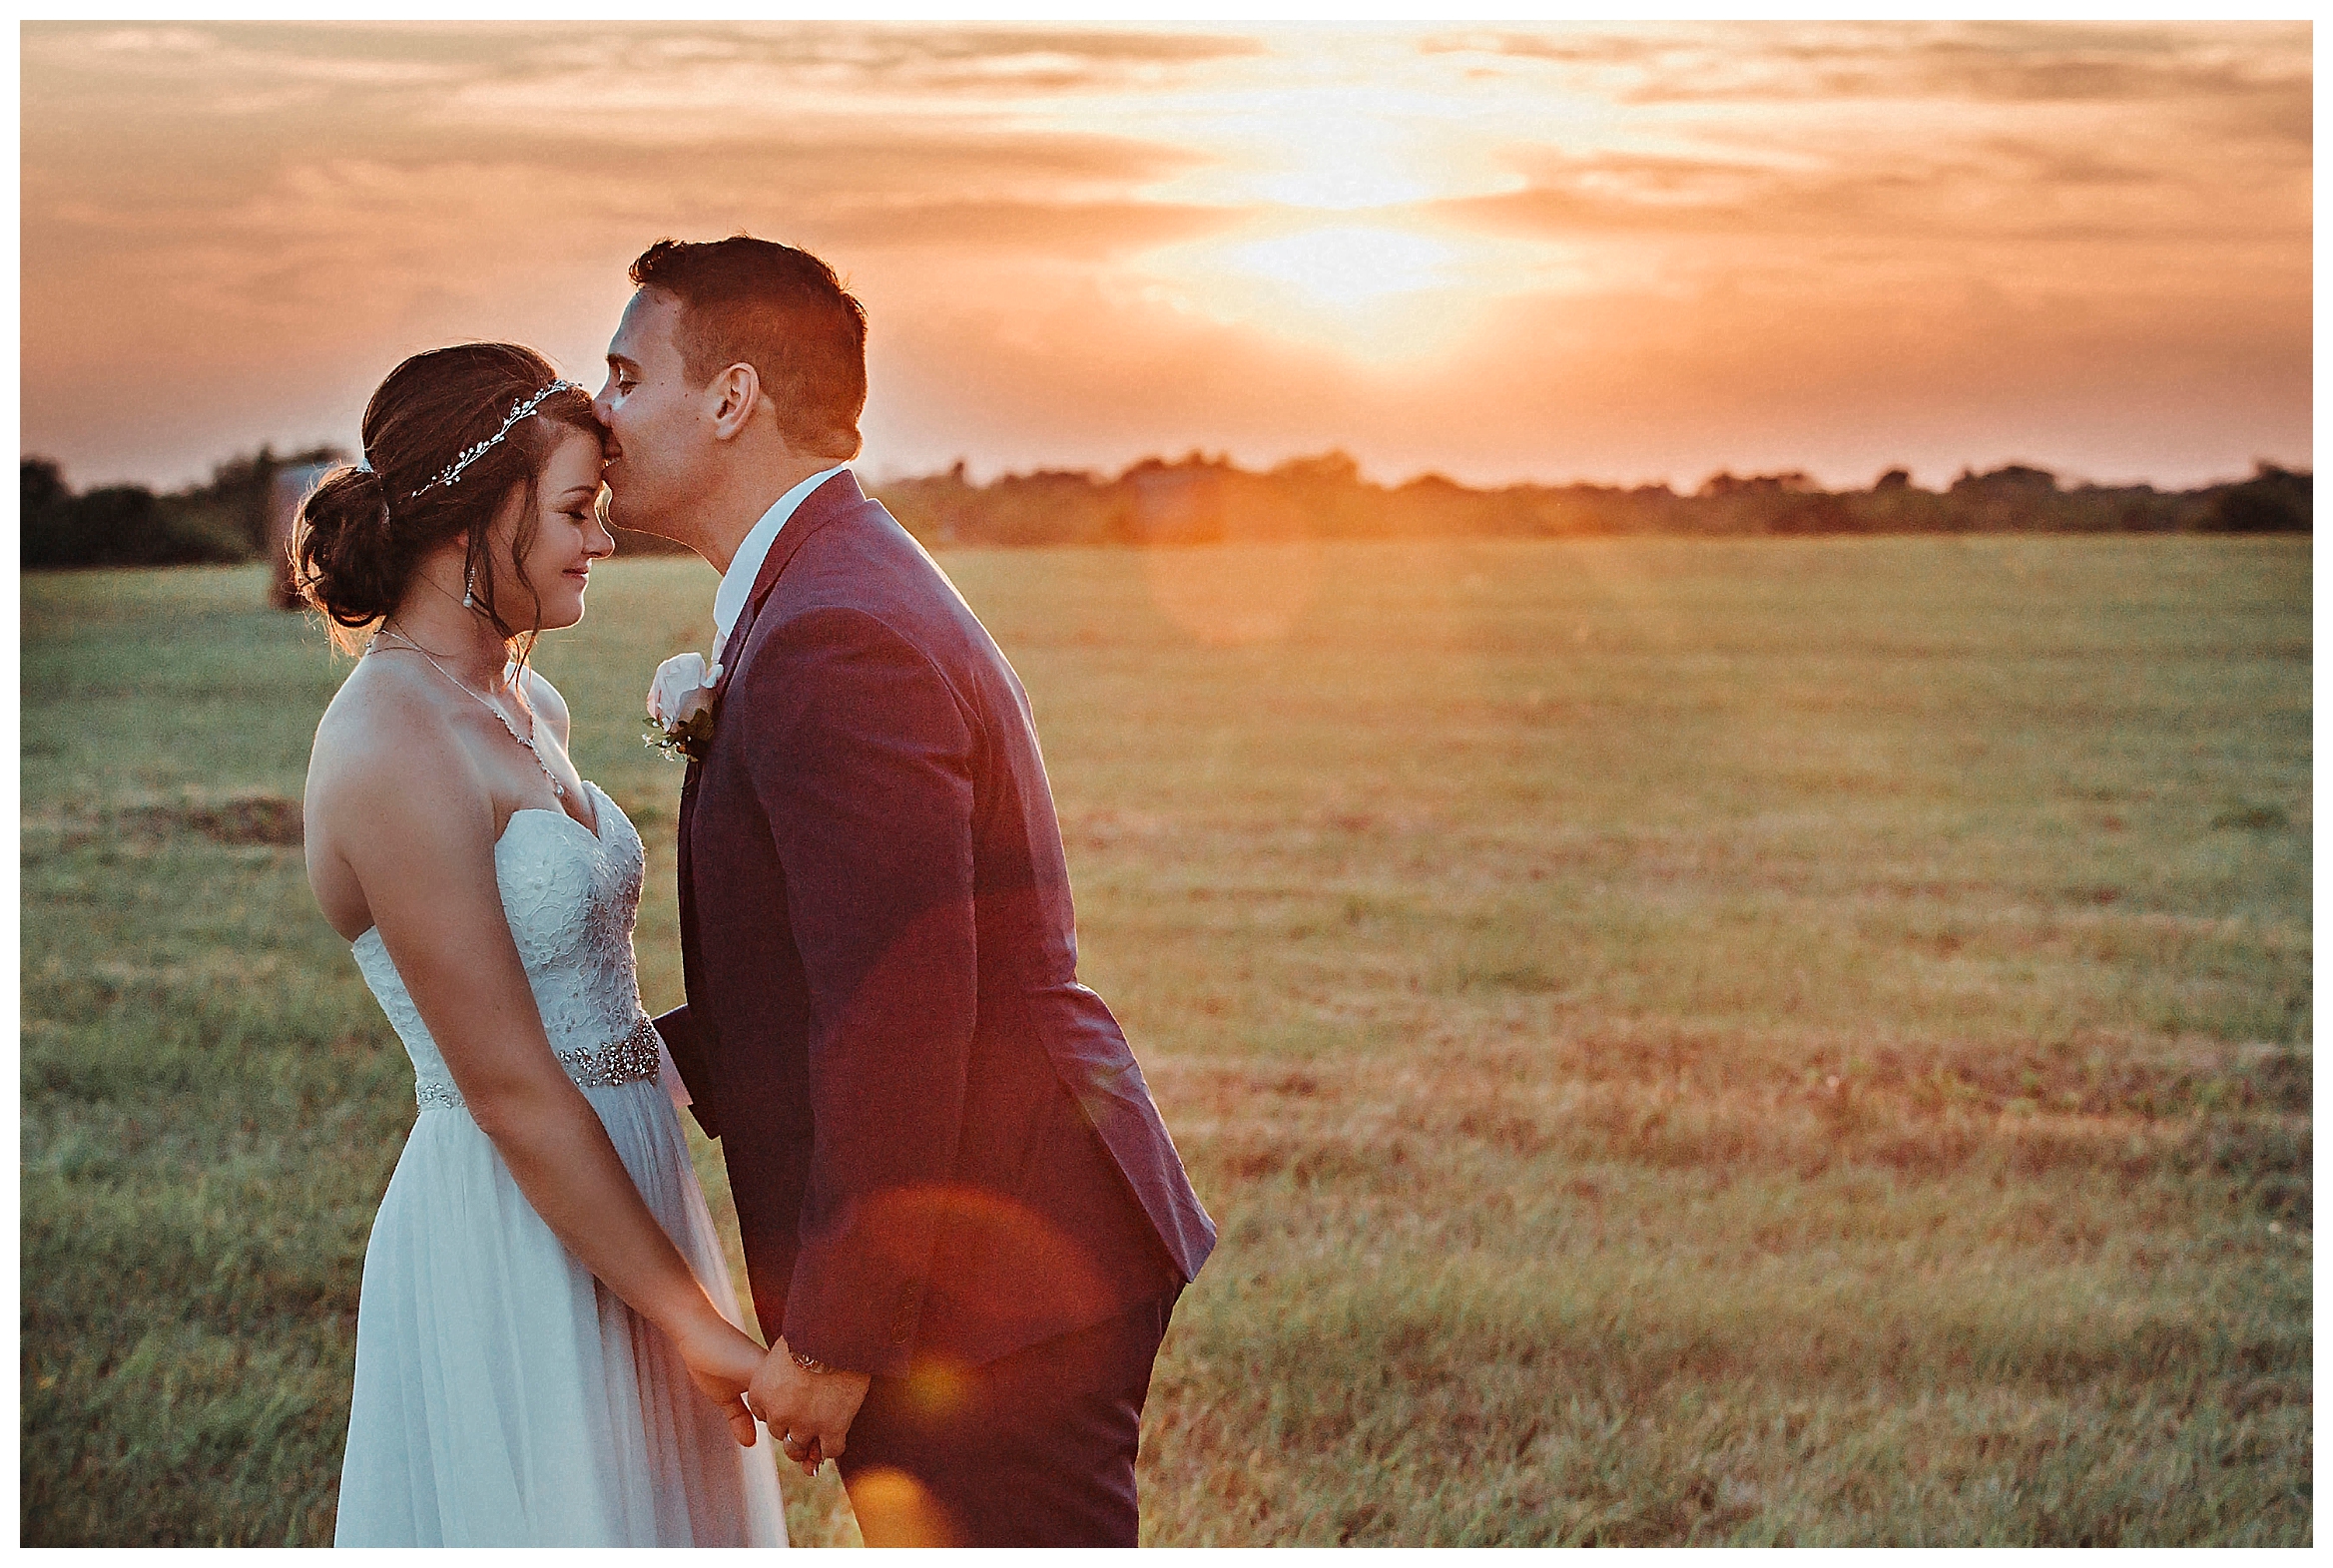 groom kissing bride on forehead at sunset